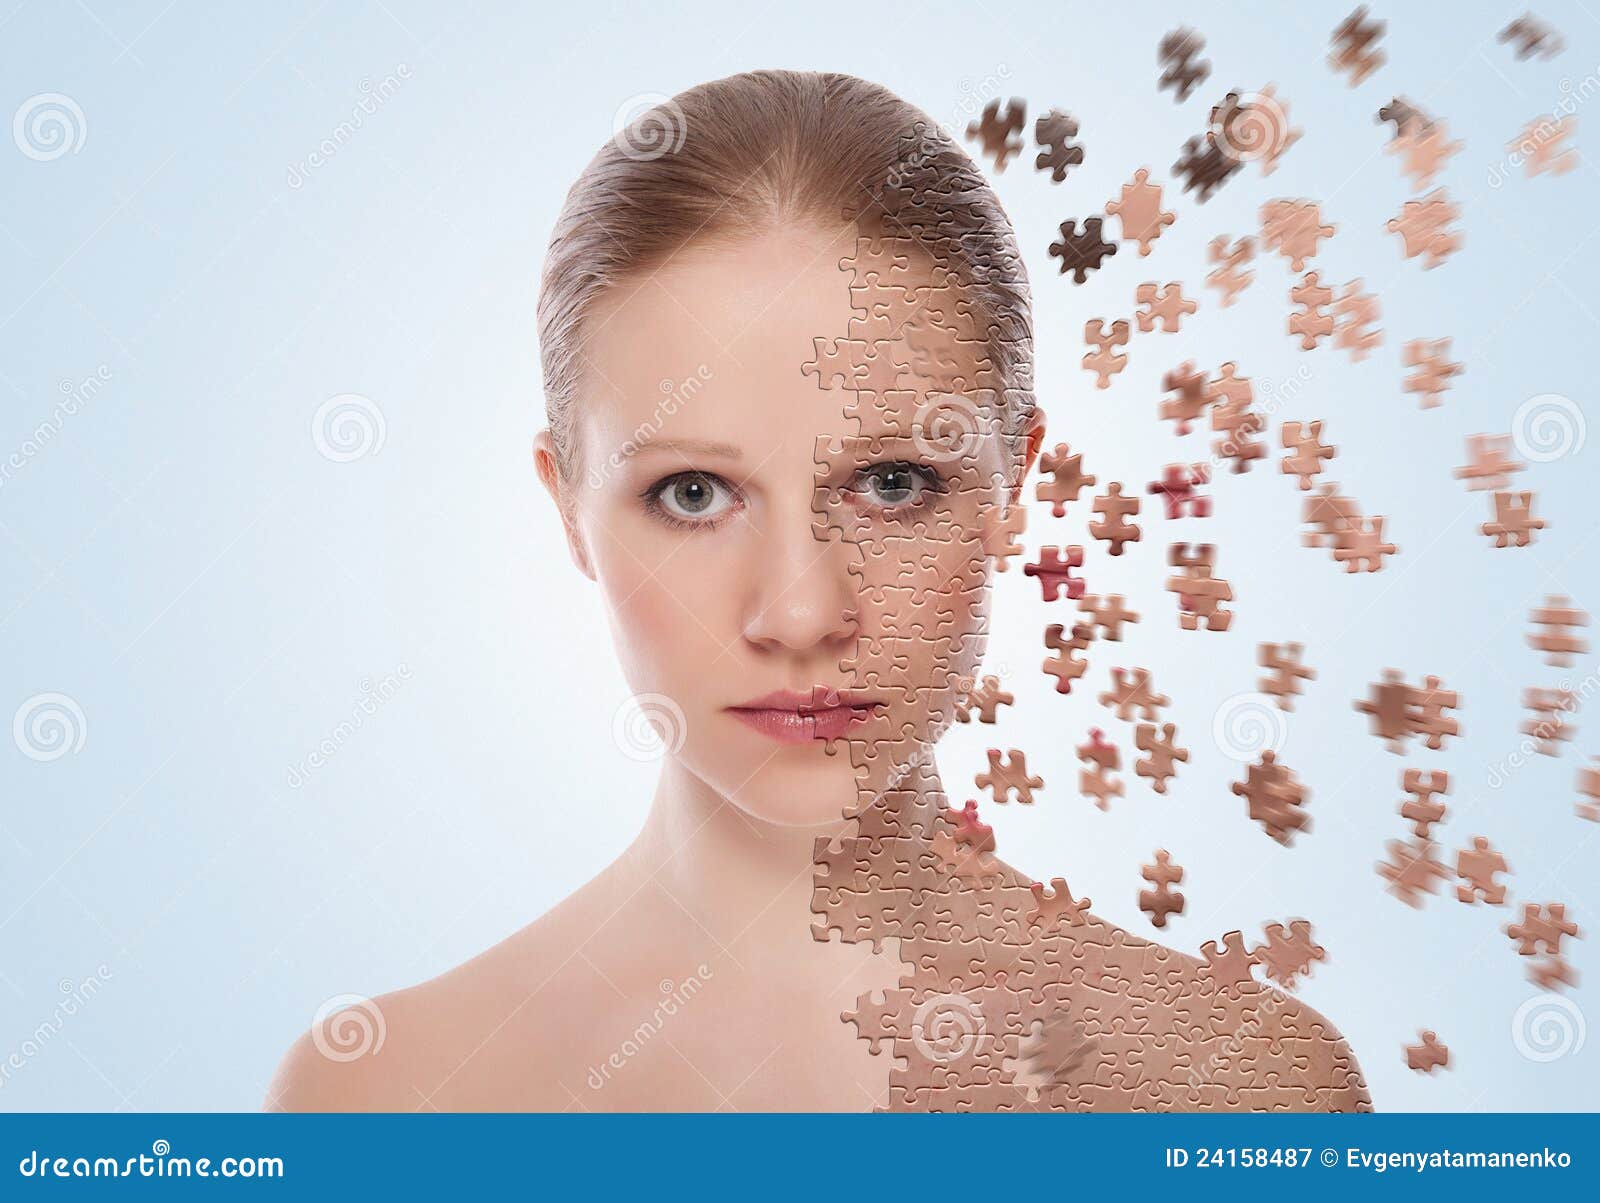 concept of cosmetic effects, treatment, skin care